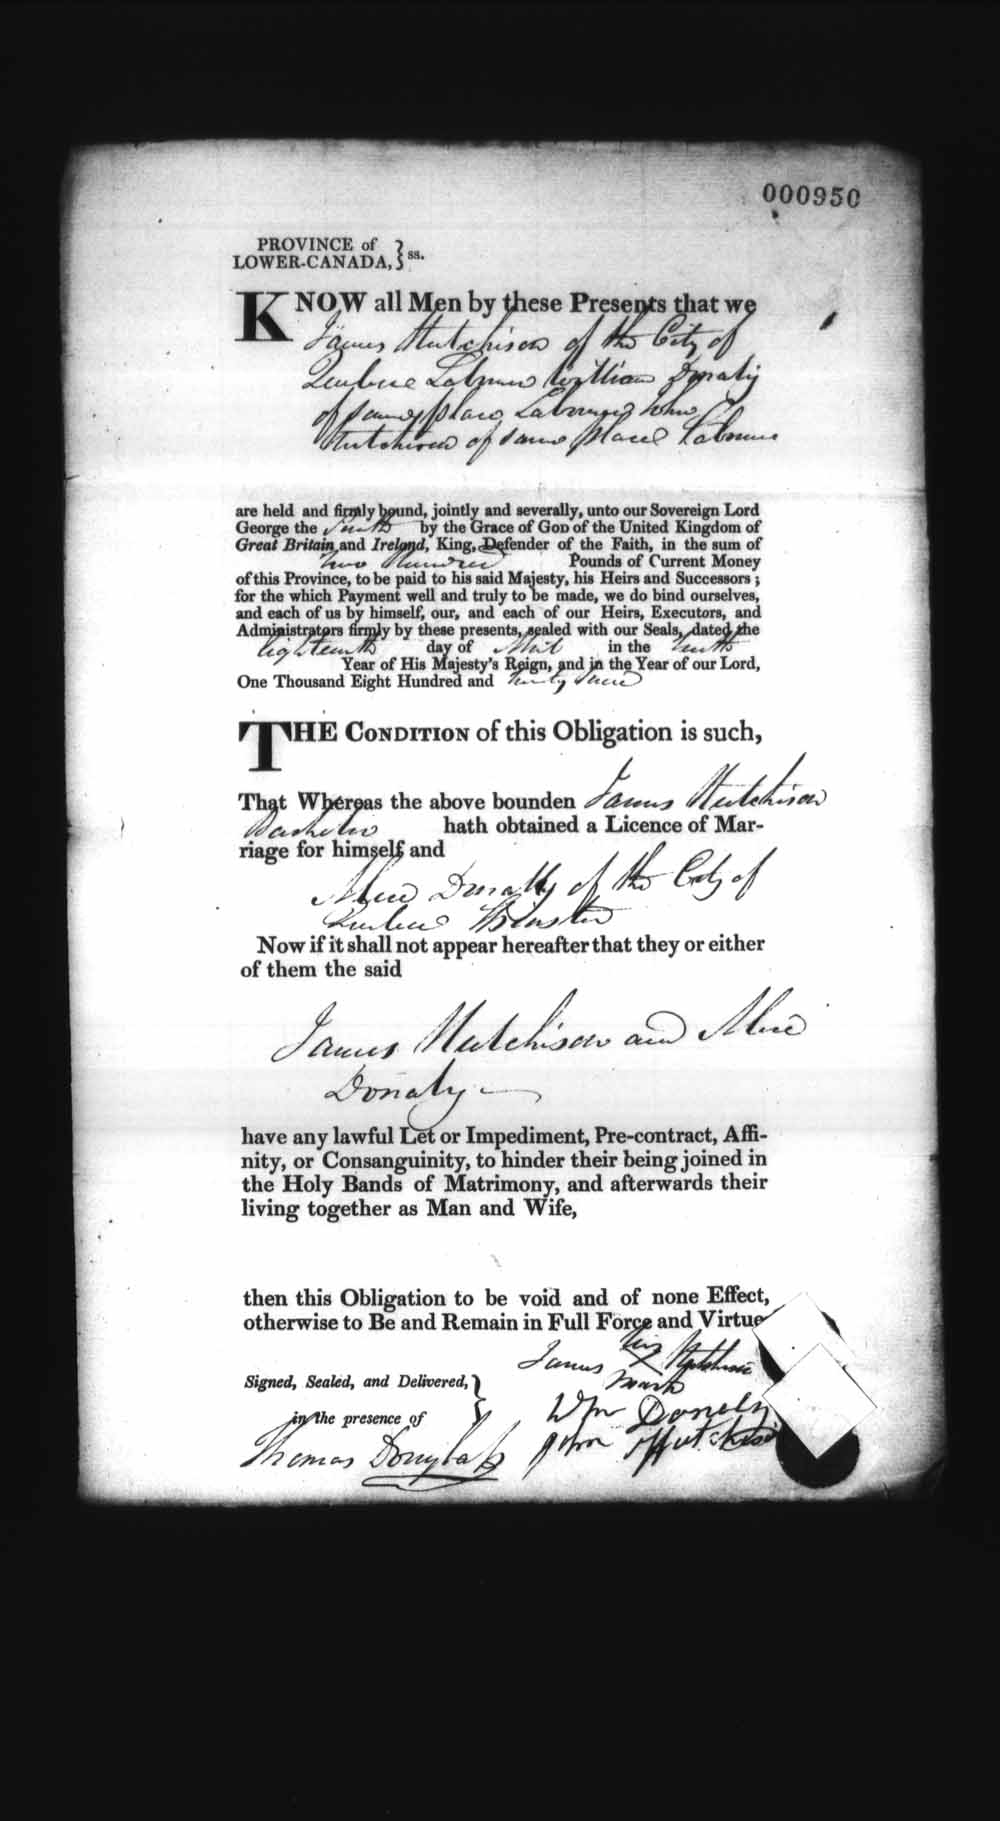 Digitized page of Upper and Lower Canada Marriage Bonds (1779-1865) for Image No.: e008237056